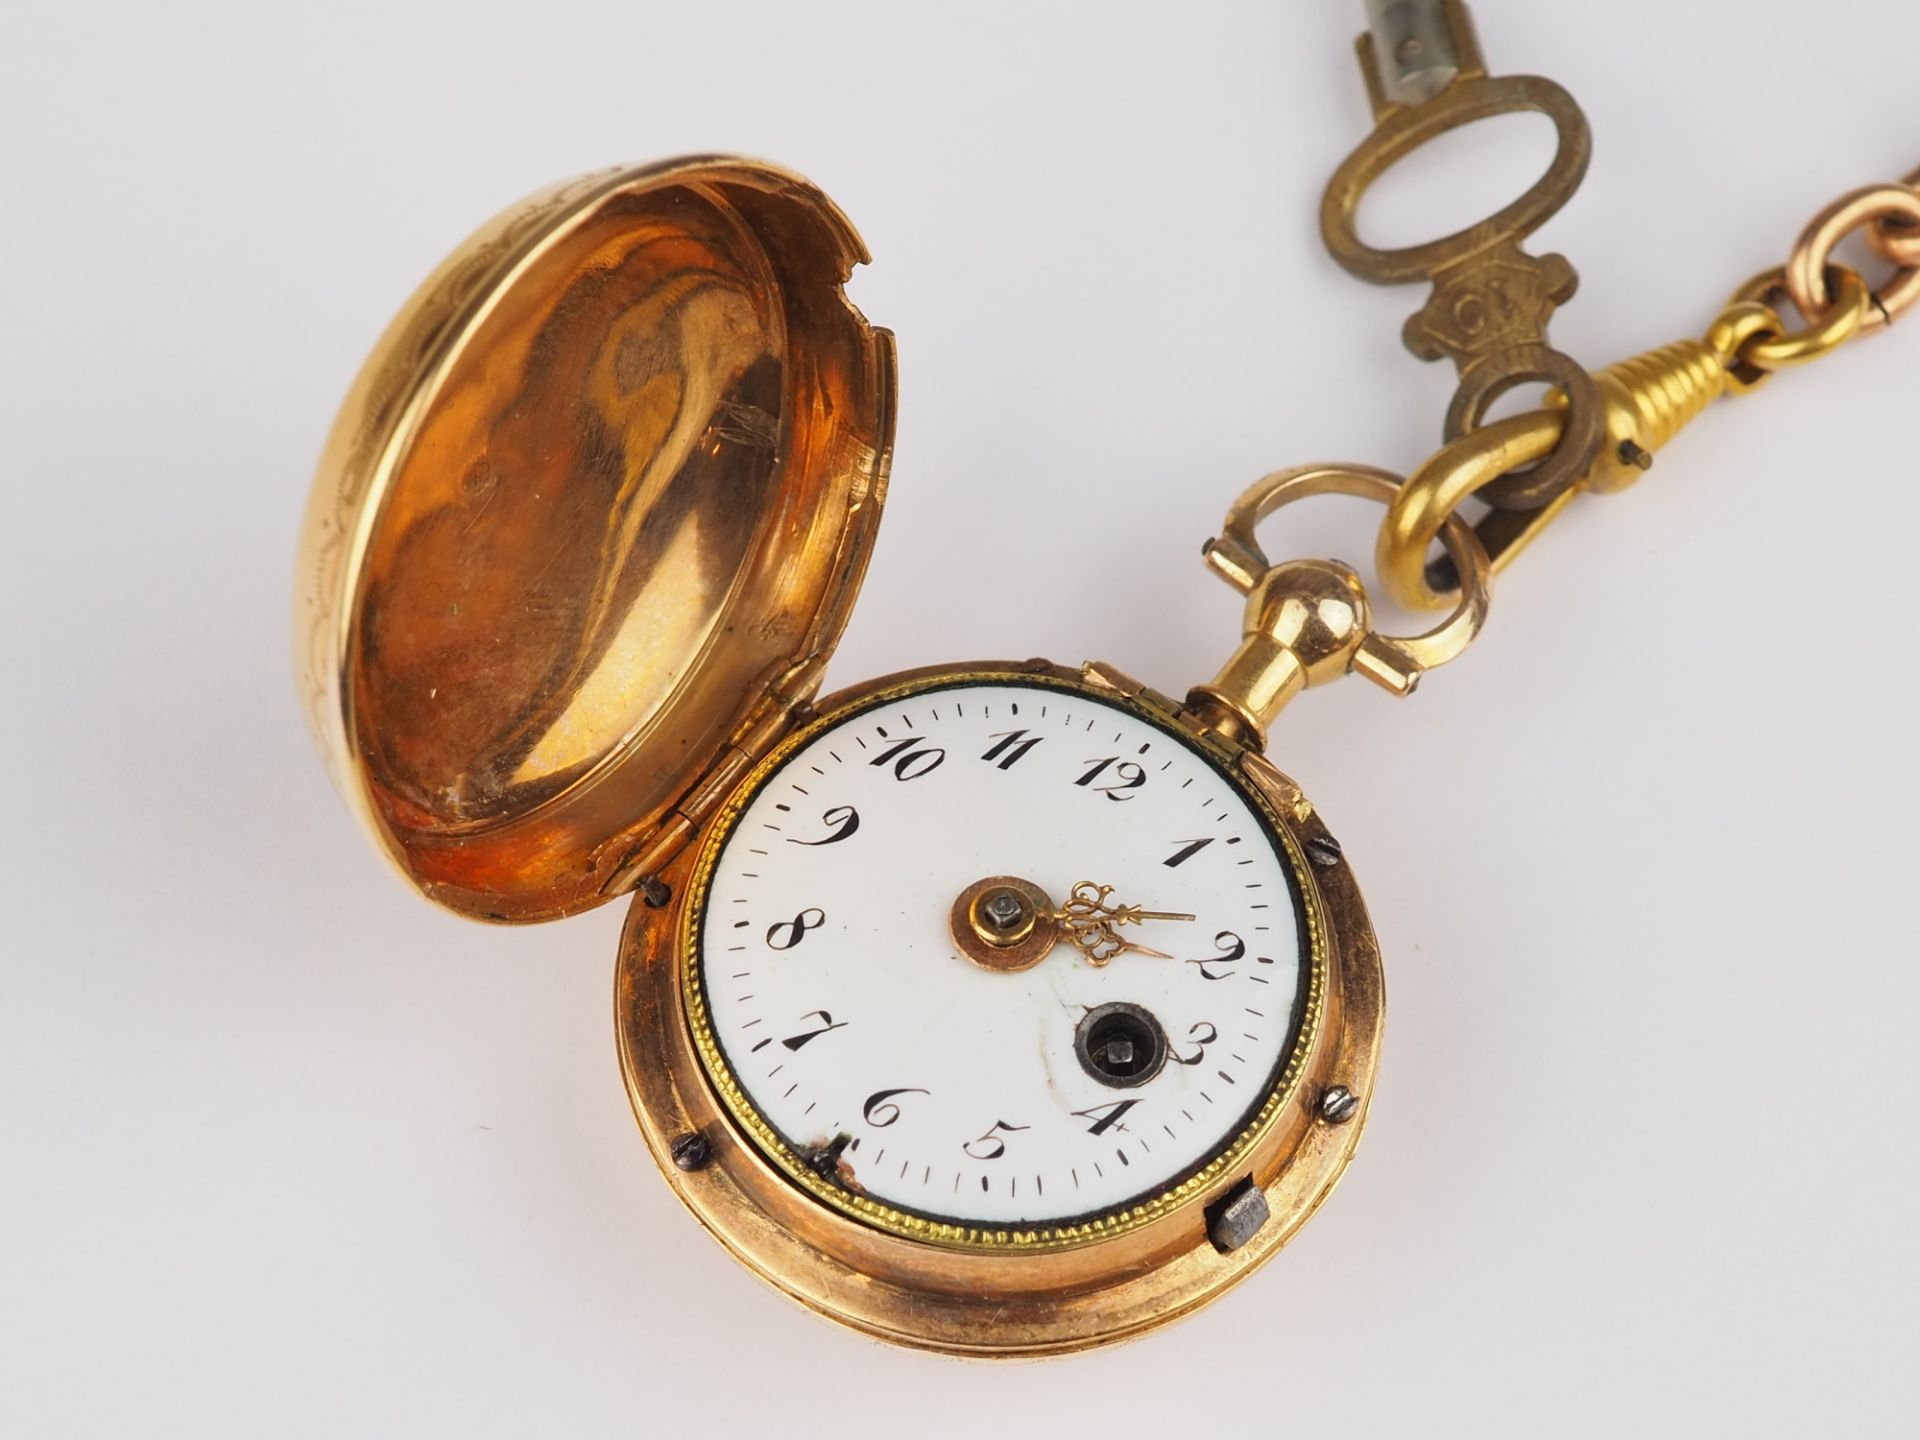 Rare small spindle pocket watch, mid-18th century.